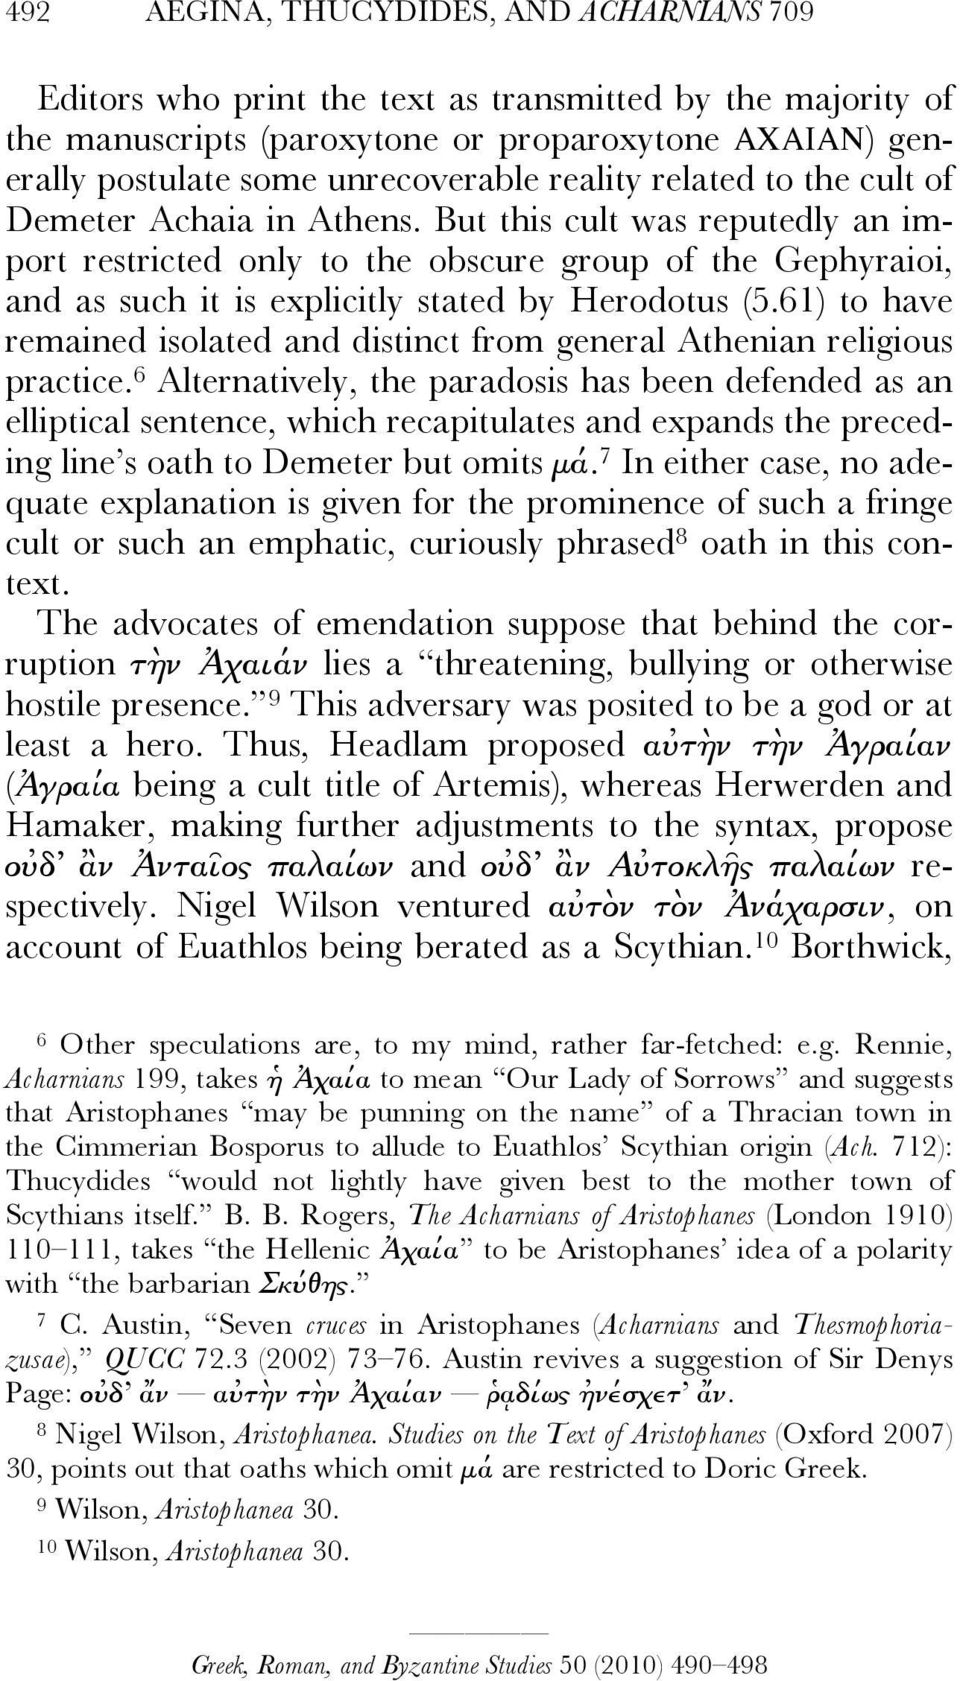 But this cult was reputedly an import restricted only to the obscure group of the Gephyraioi, and as such it is explicitly stated by Herodotus (5.